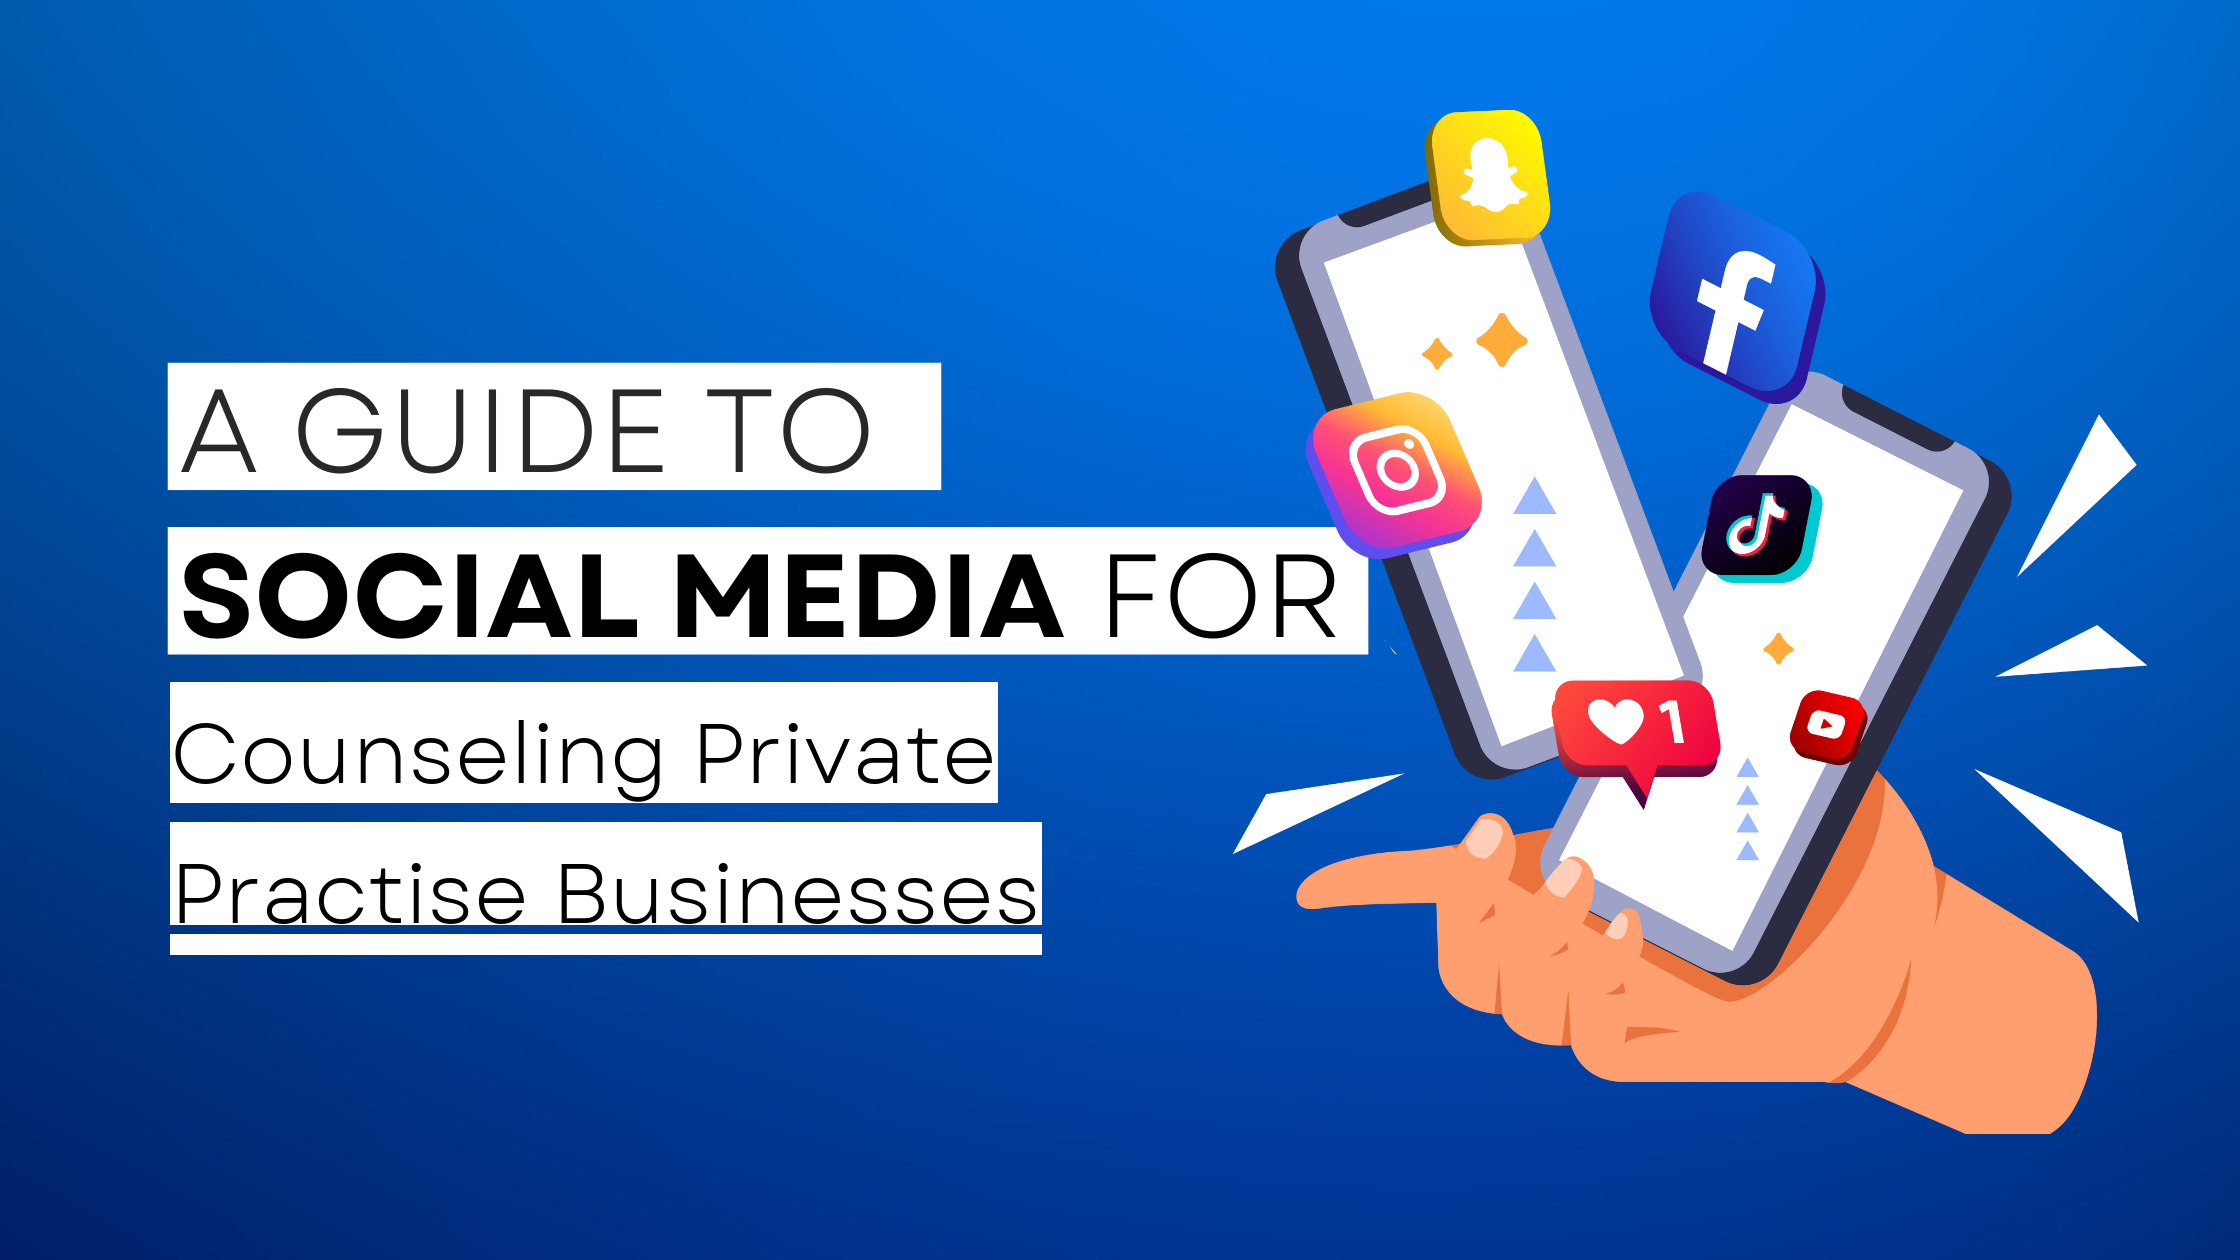 How to start Counseling Private Practise on social media